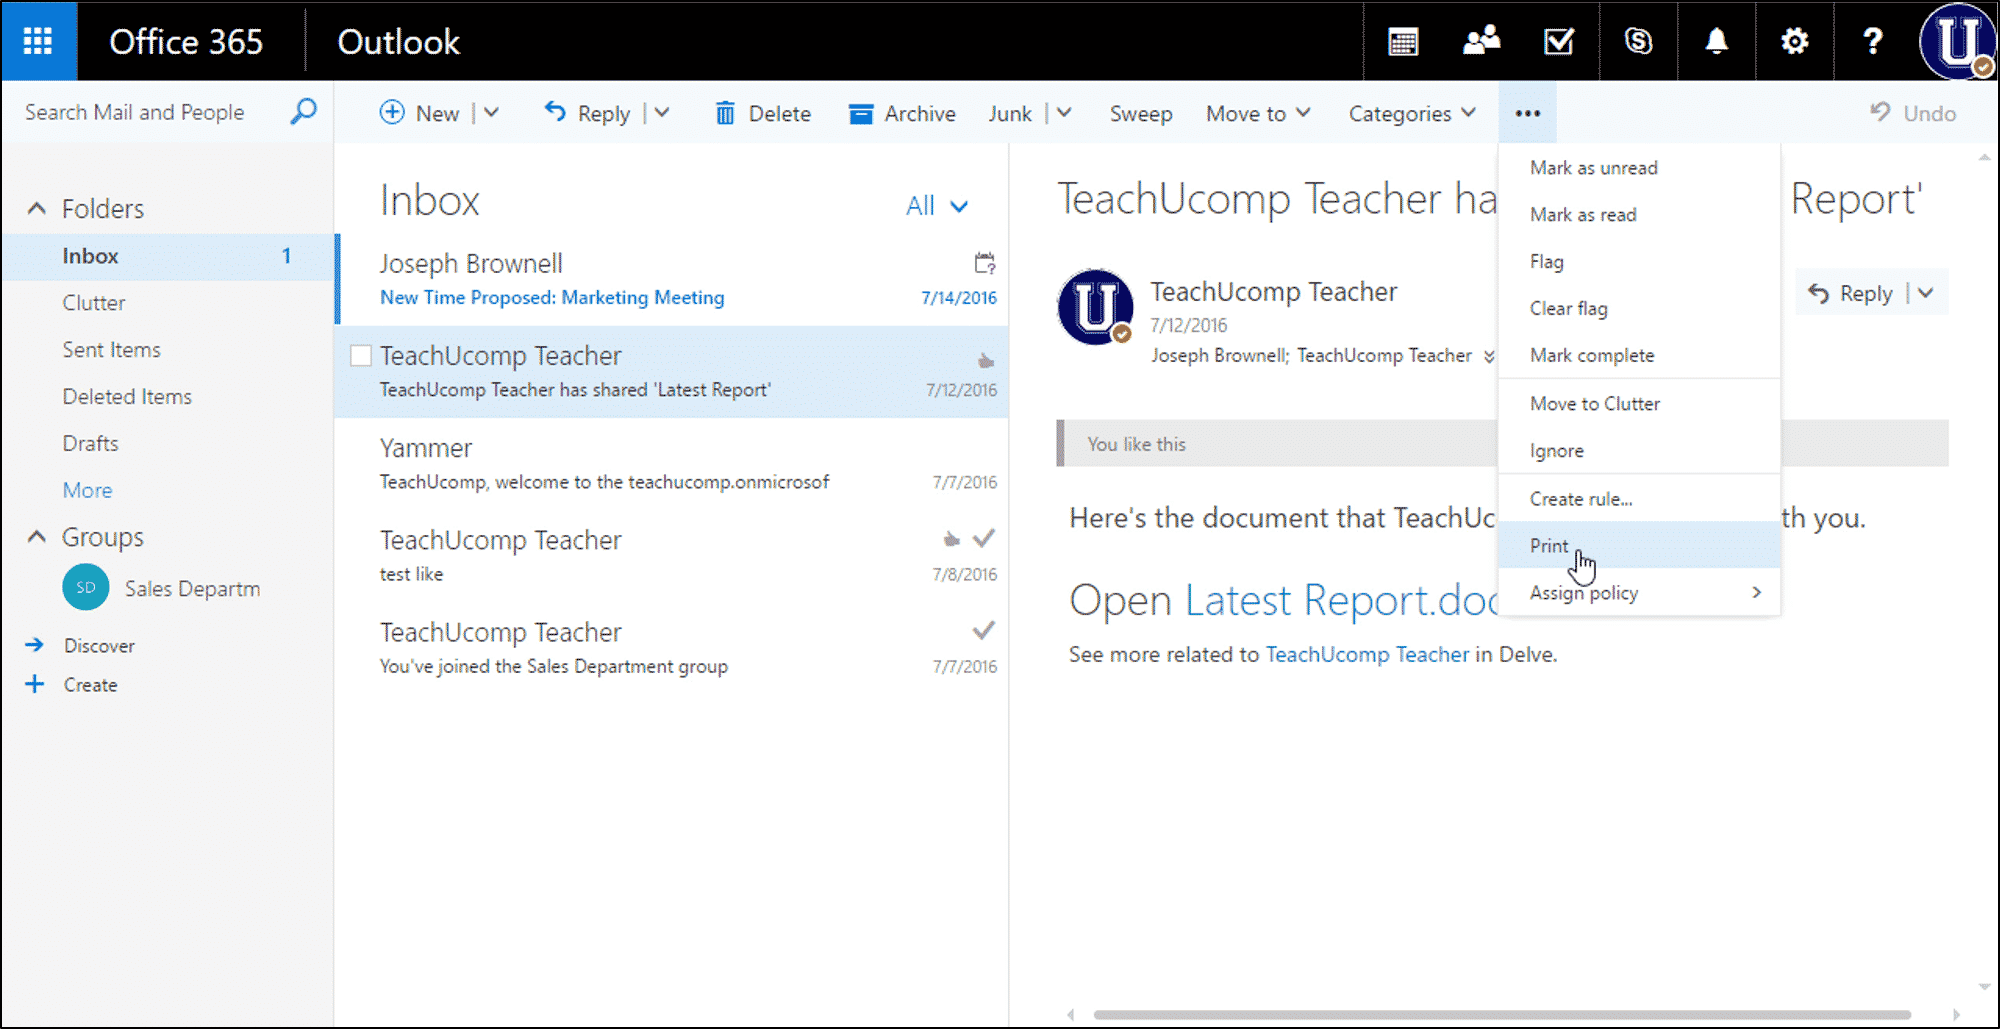 How To Print On Outlook?